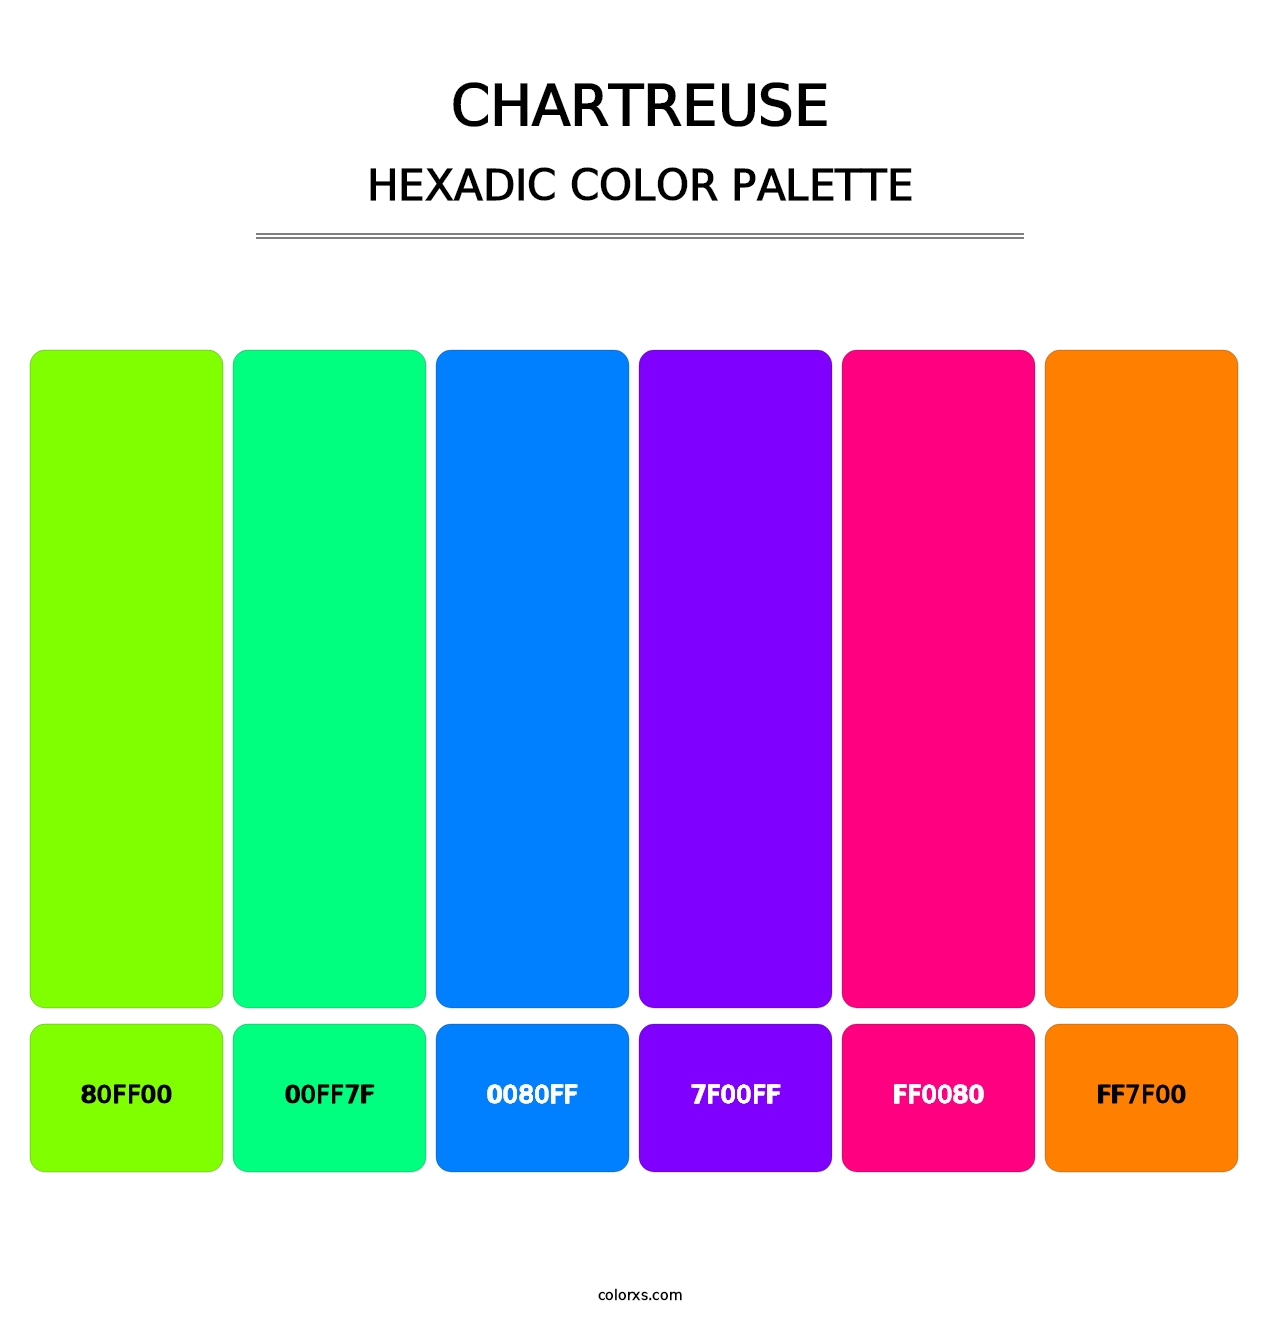 Chartreuse - Hexadic Color Palette